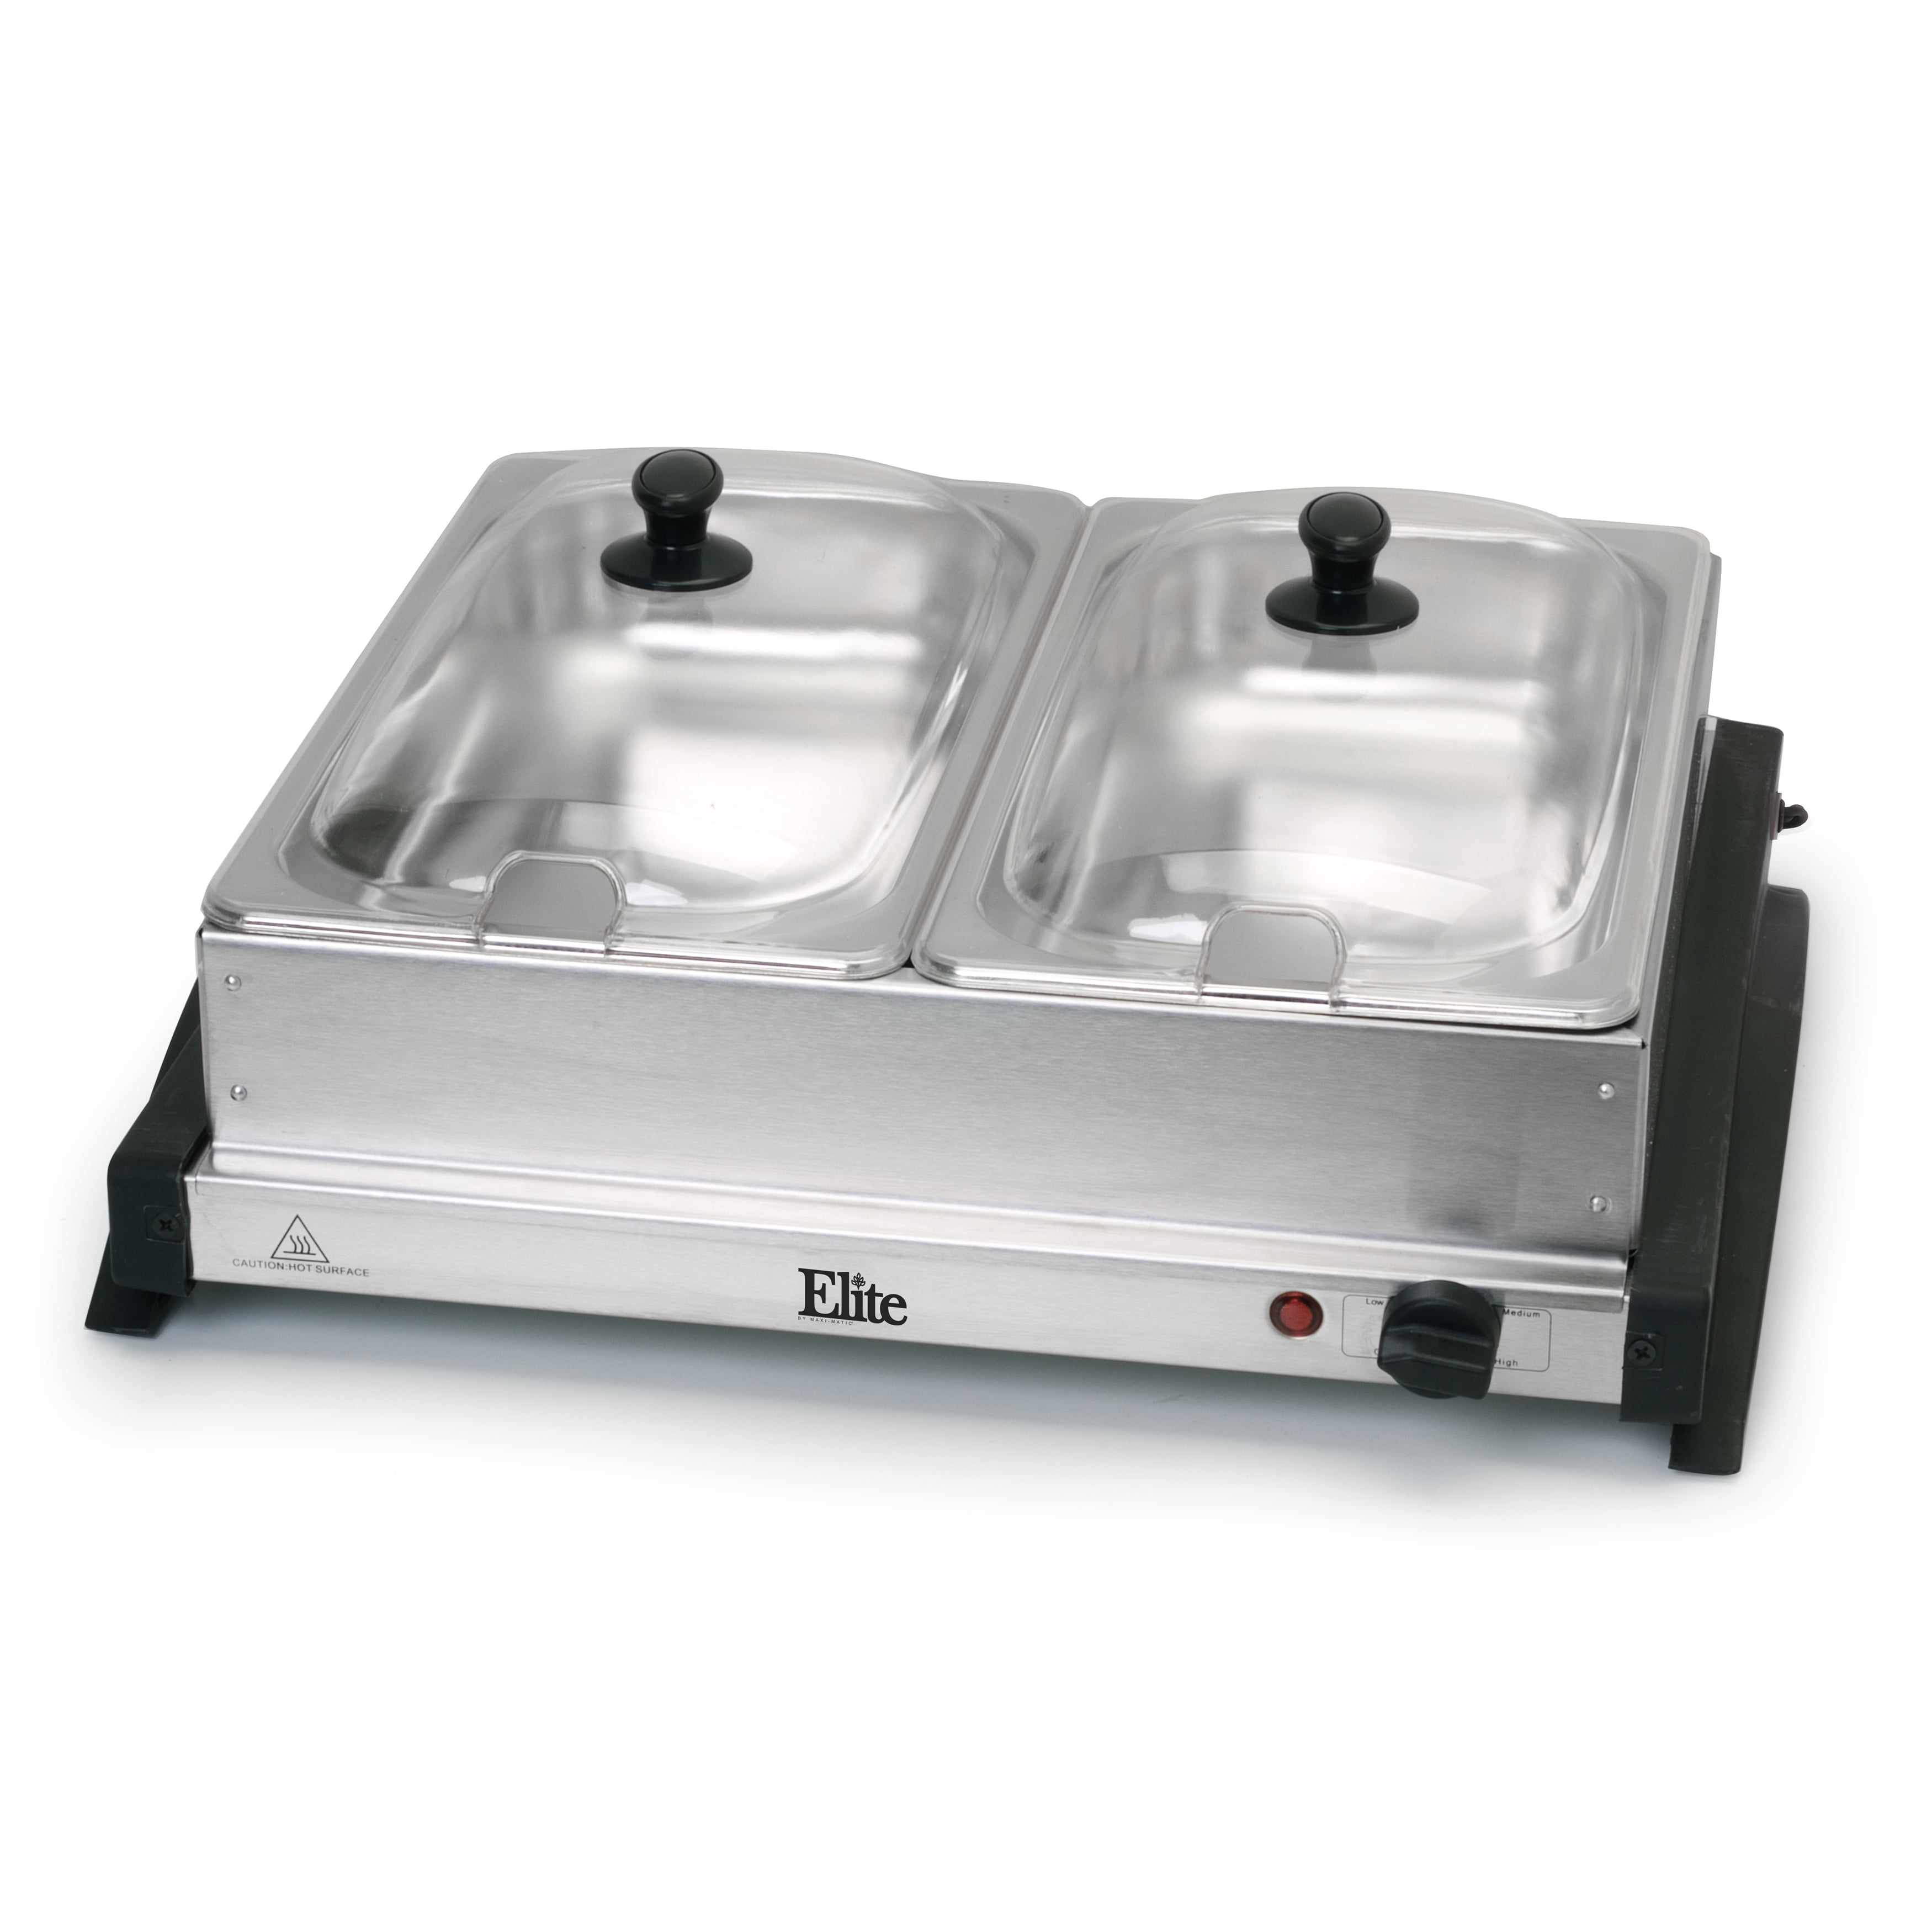 TOP 5 BEST BUFFET SERVER AND WARMING TRAYS IN 2021 REVIEWS 